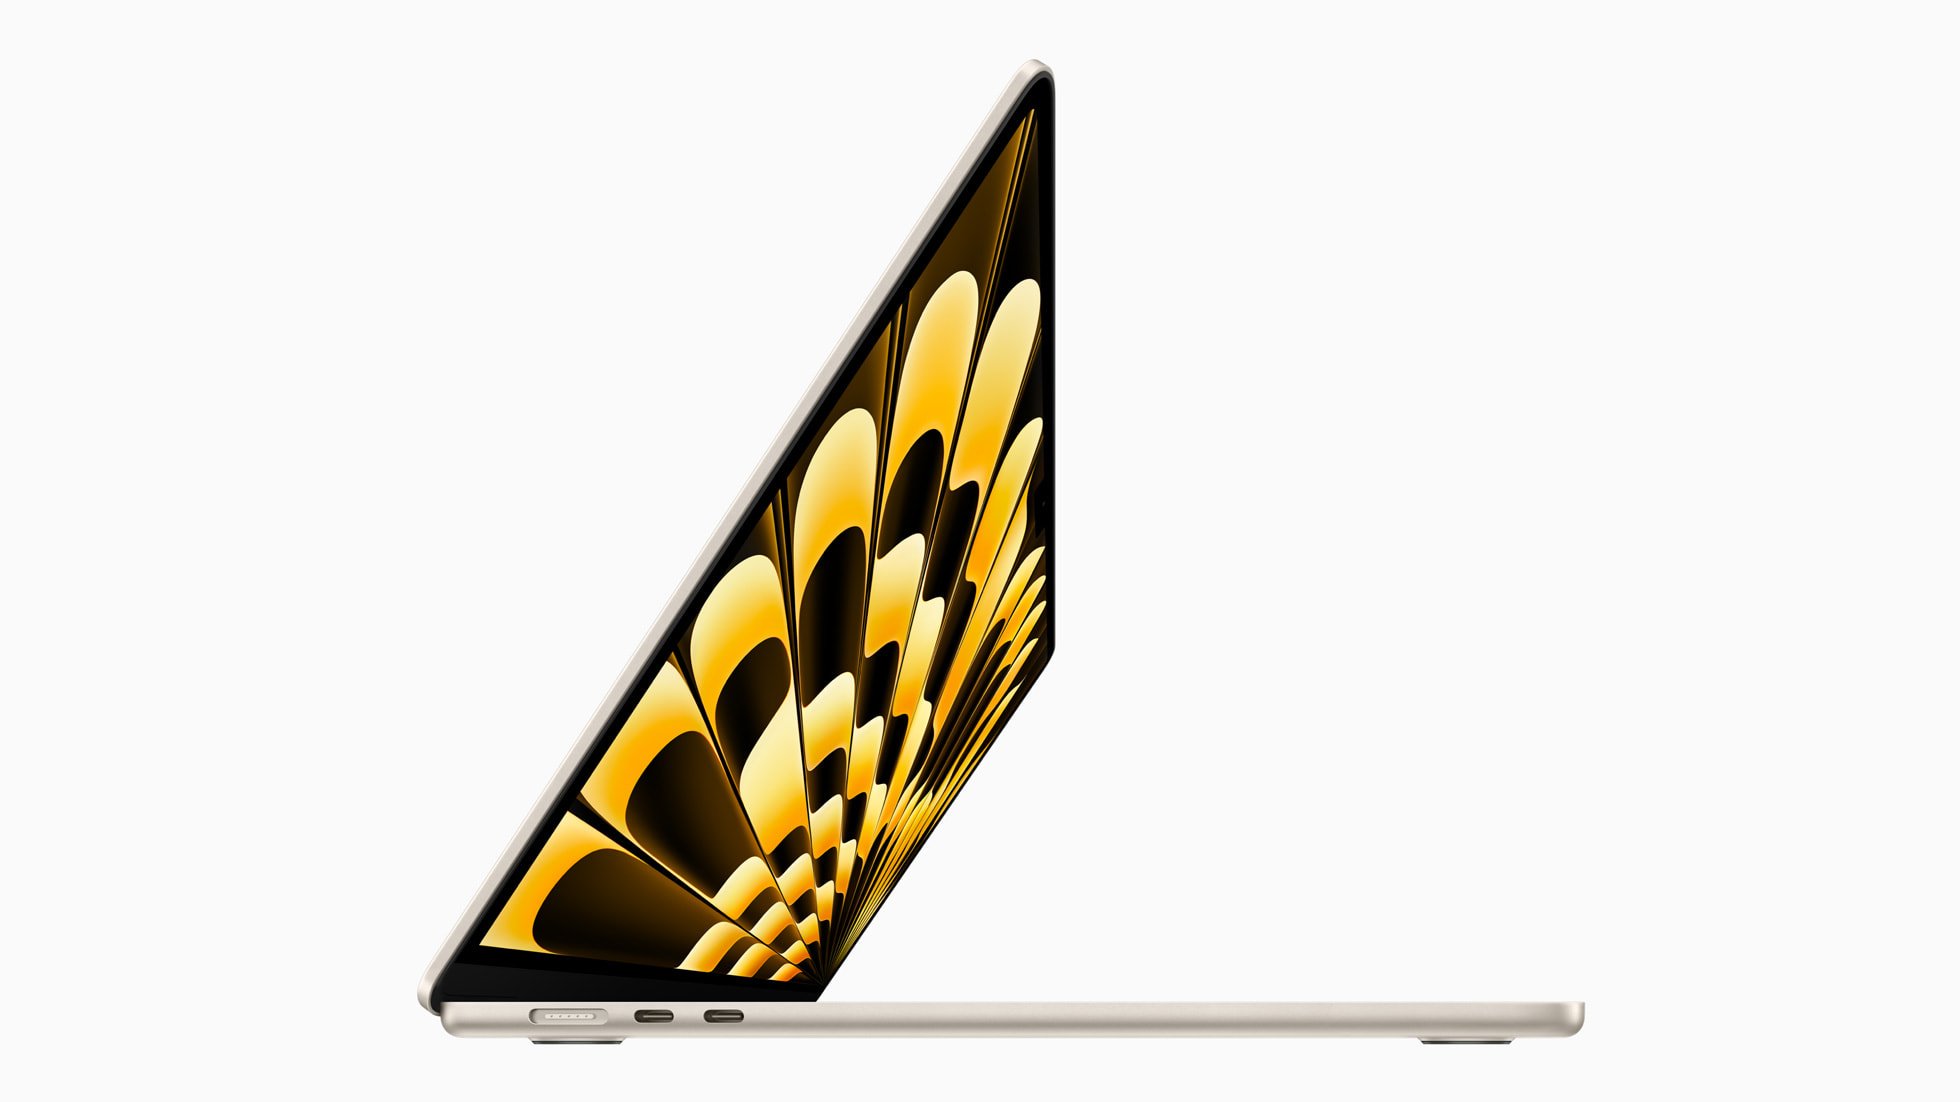 The image shows MacBook Air. — Apple